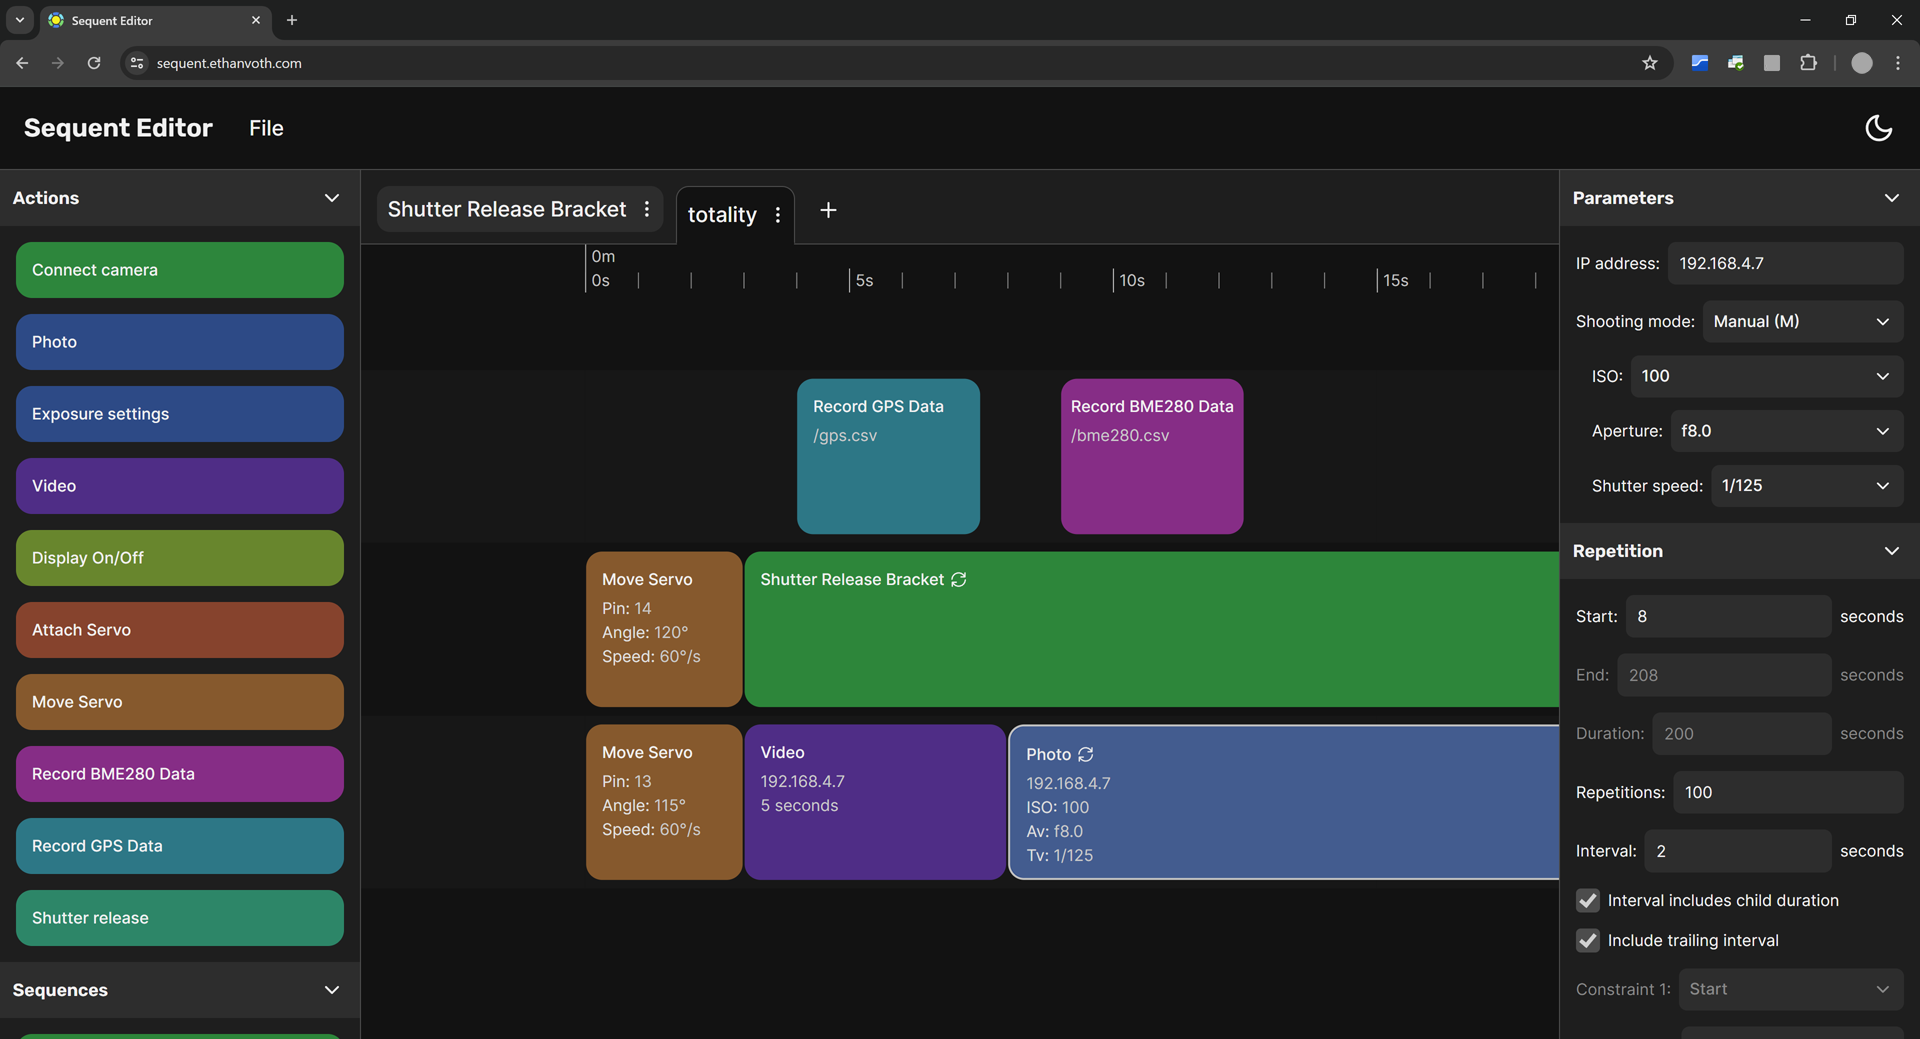 Screenshot of Sequent web editor showing various actions on the timeline